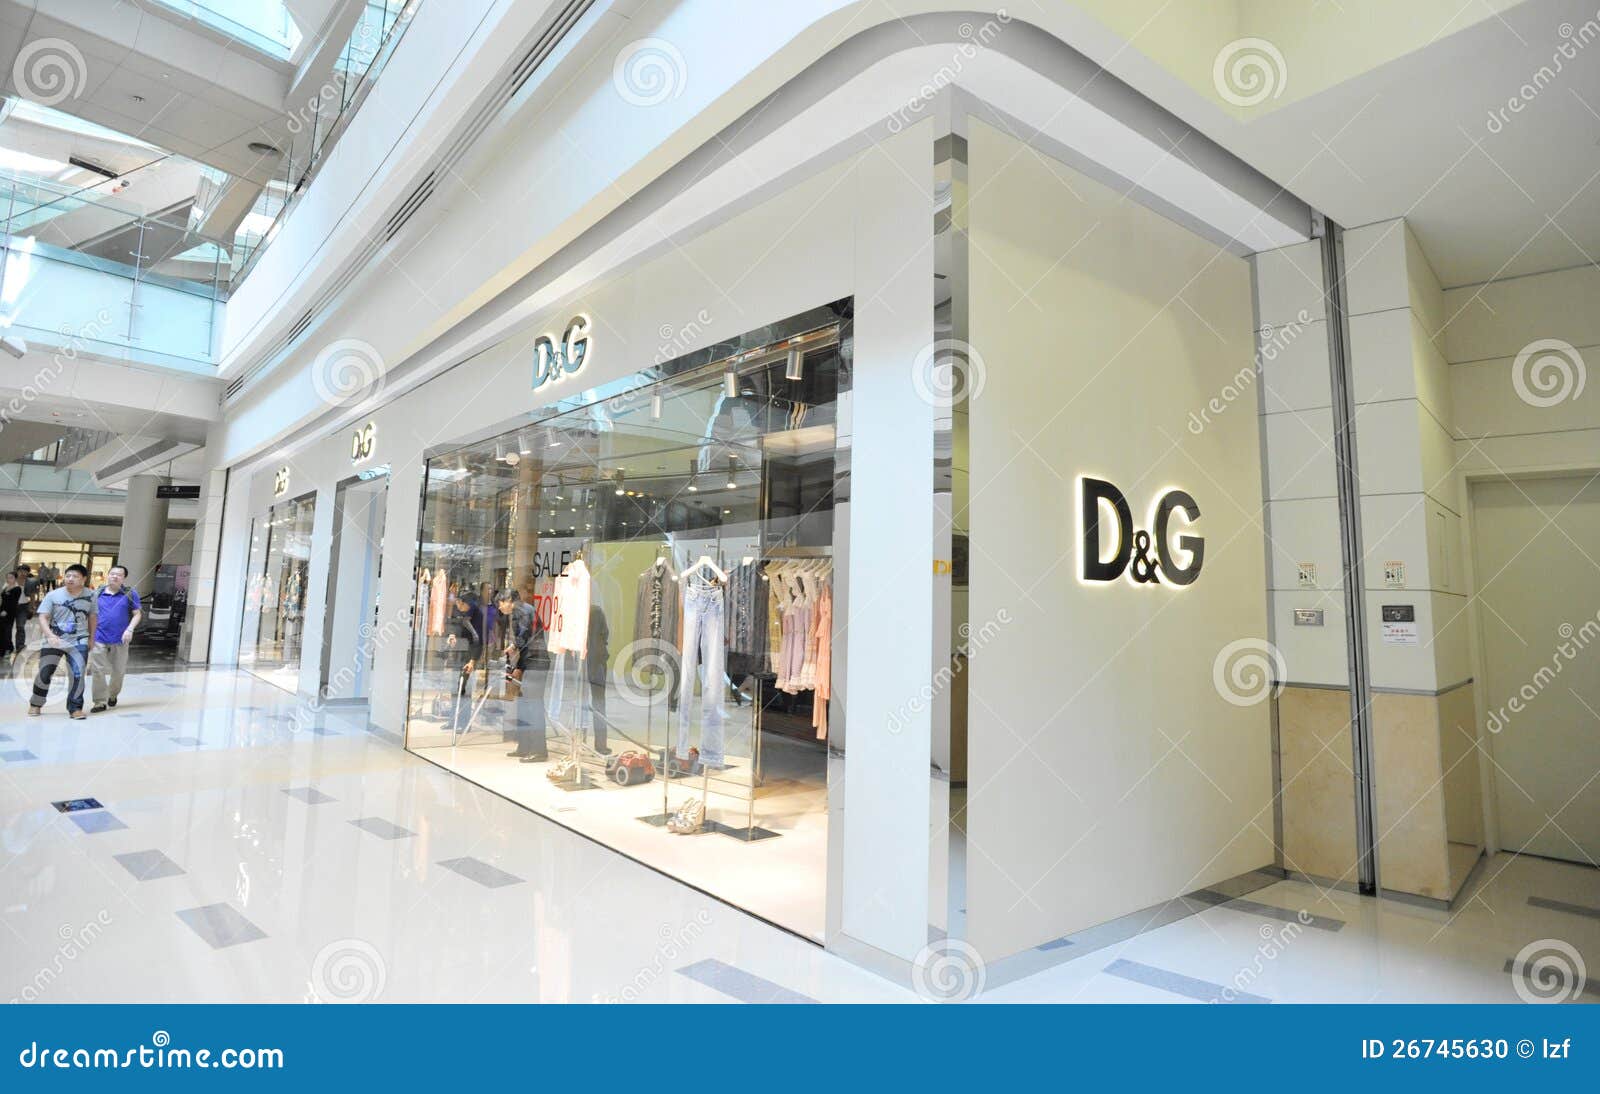 d and g store